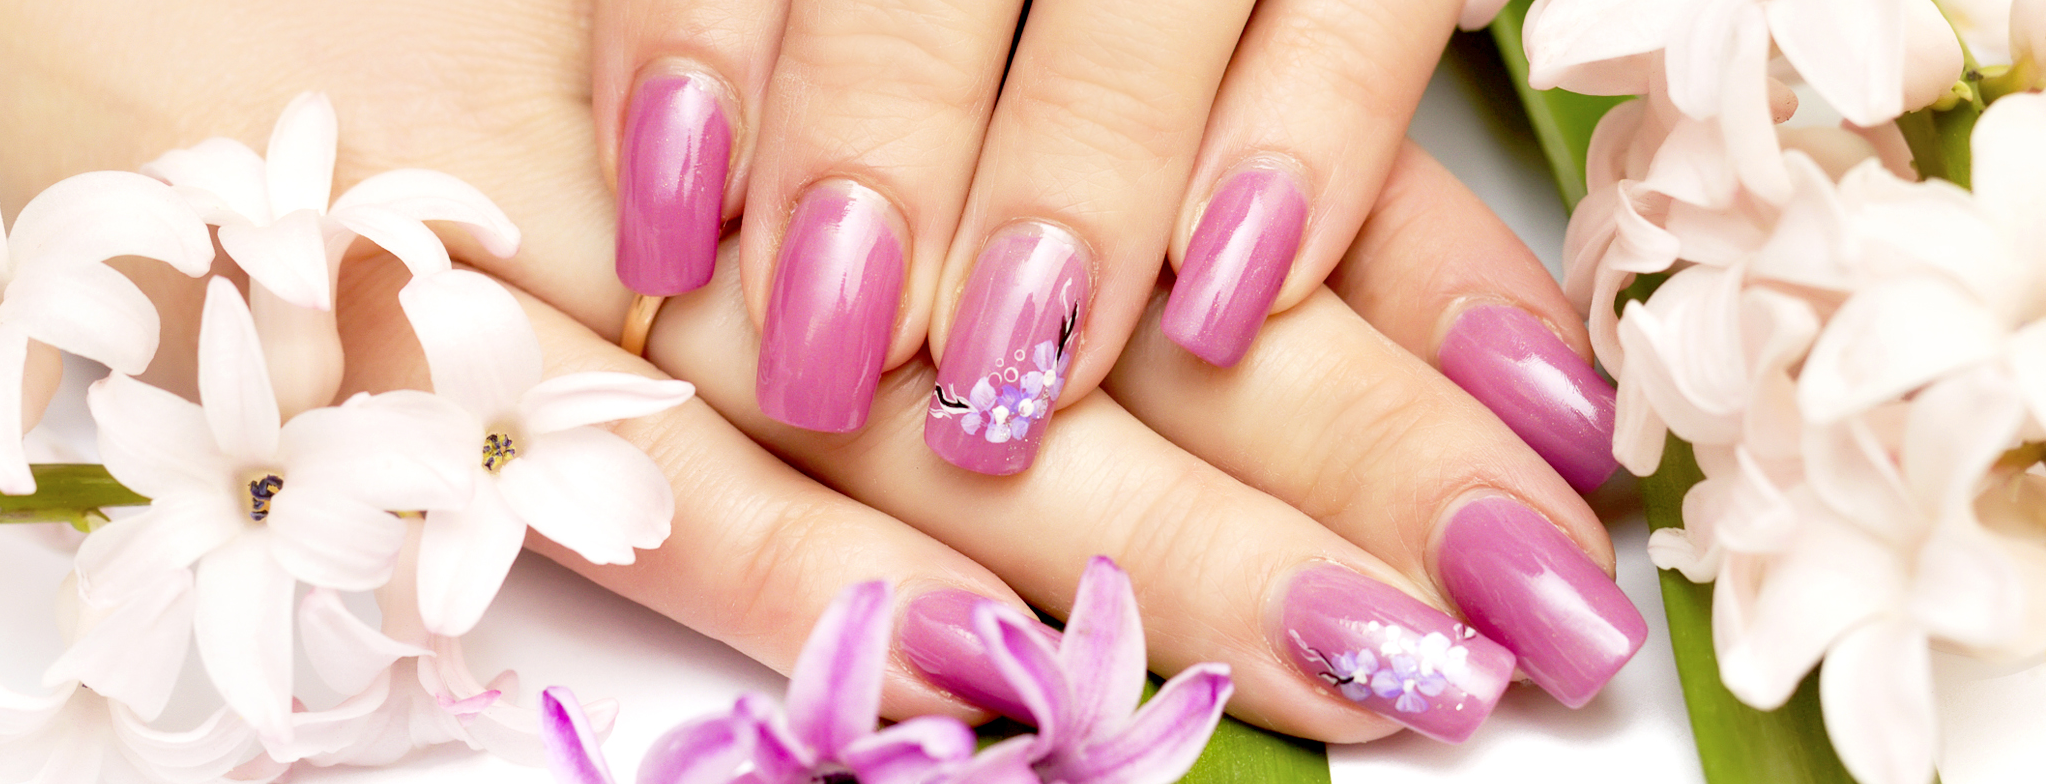 7. Nail Art Salon Packages for Special Occasions - wide 8